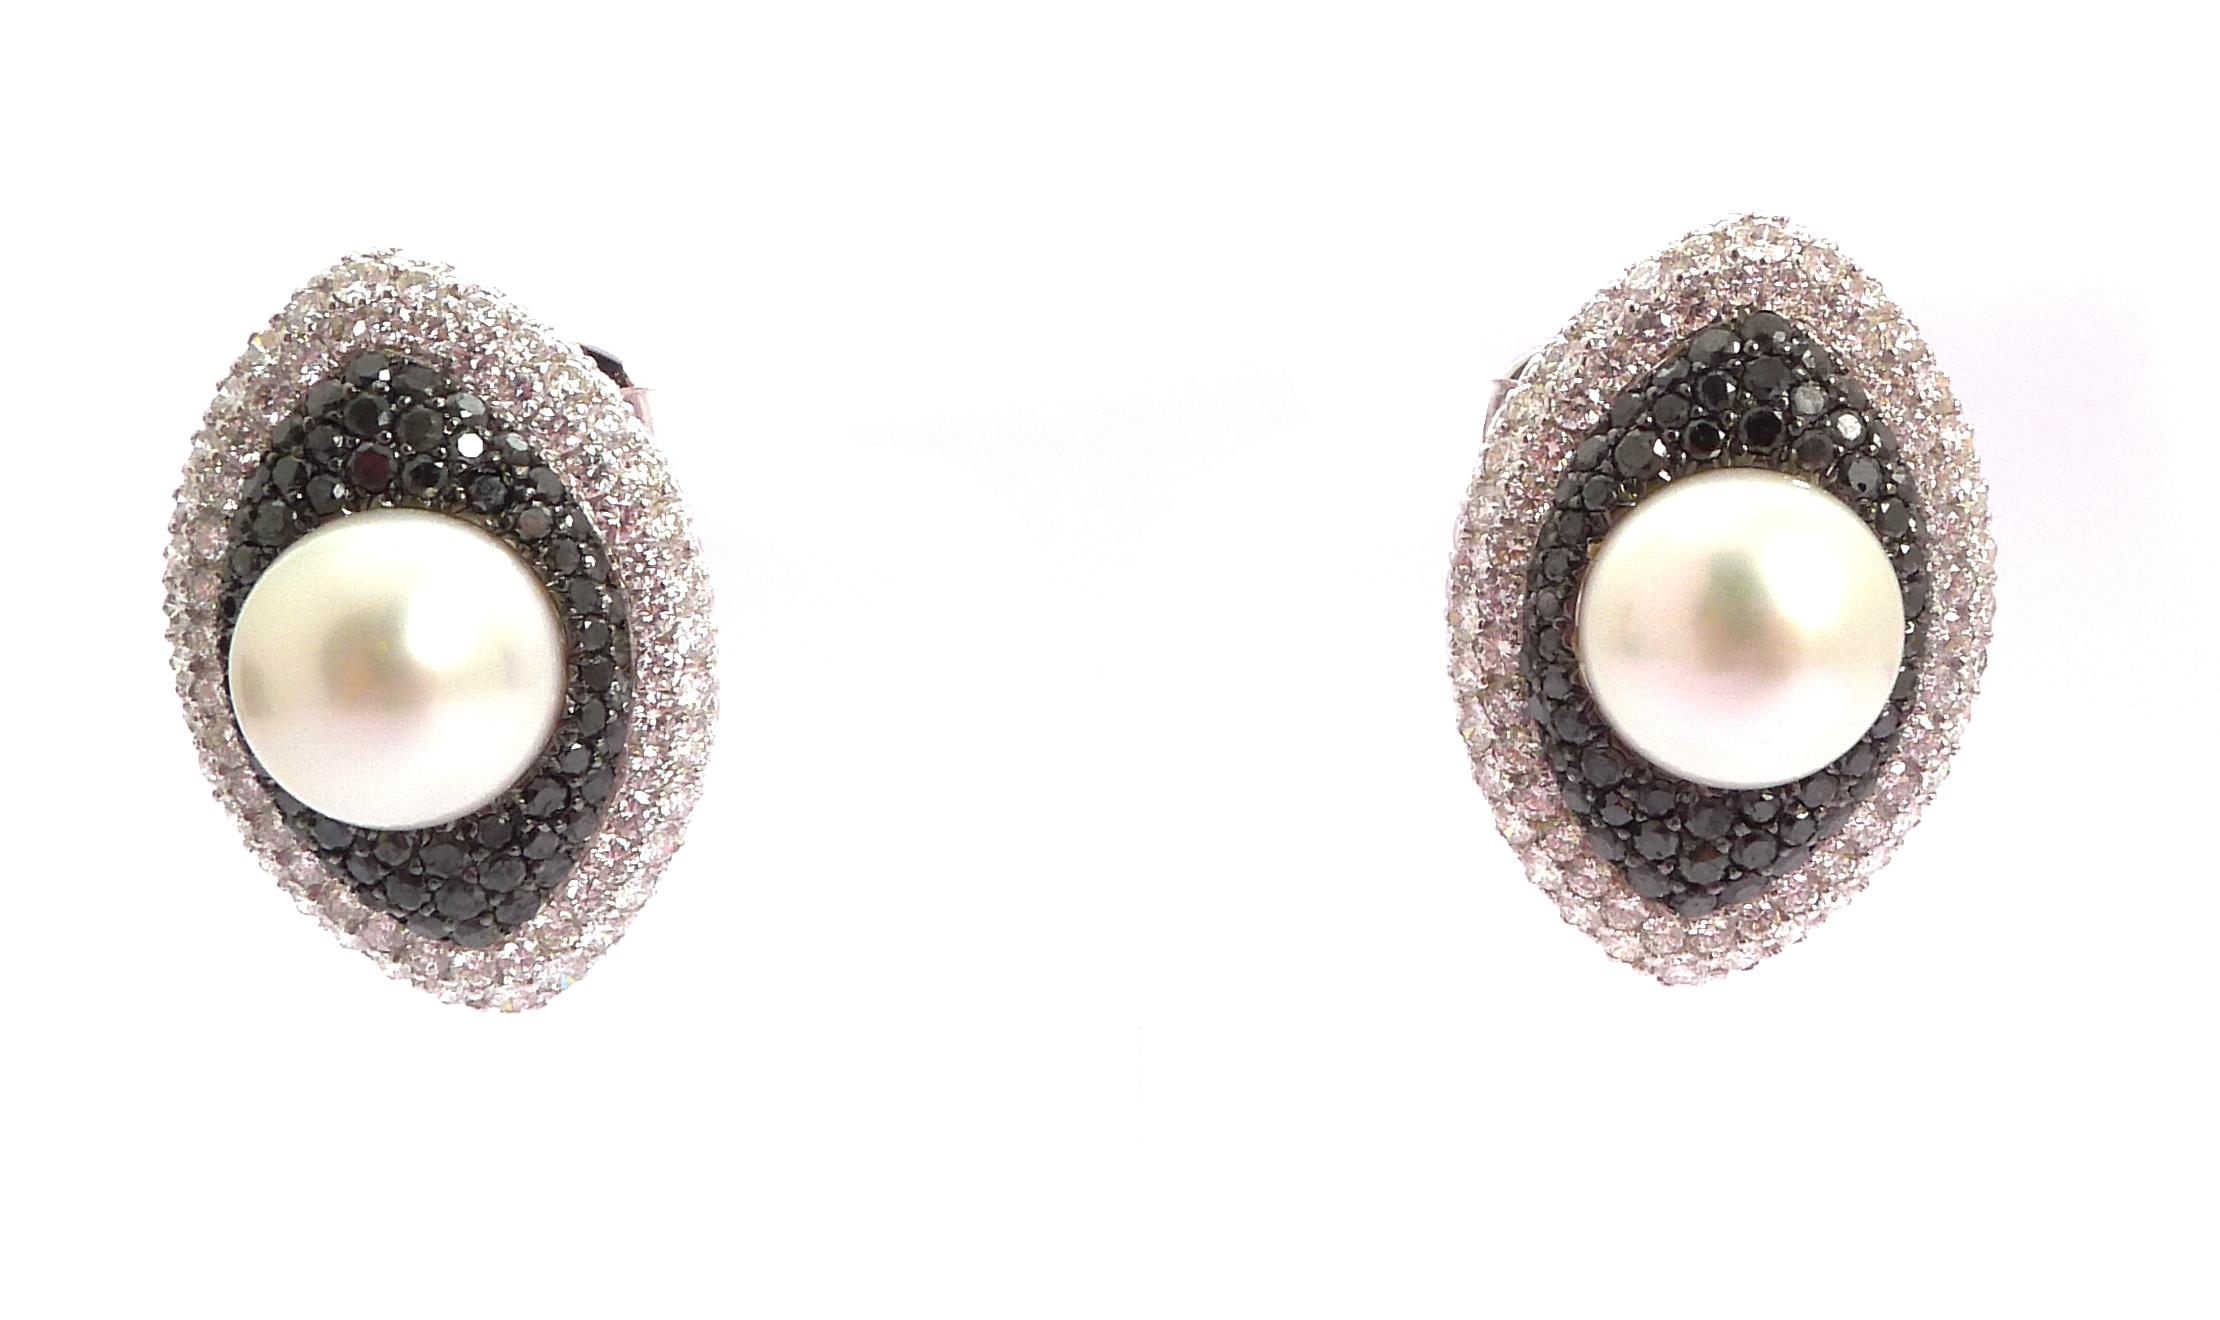 Each centering upon a white cultured pearl in a tiered 'navette' surround pavé-set with diamonds and black diamonds

Mounted in 18K white gold

- 2 cultured pearls: 55.84 ct total, white
- 128 black round diamonds: 4.88 ct total
- 280 round